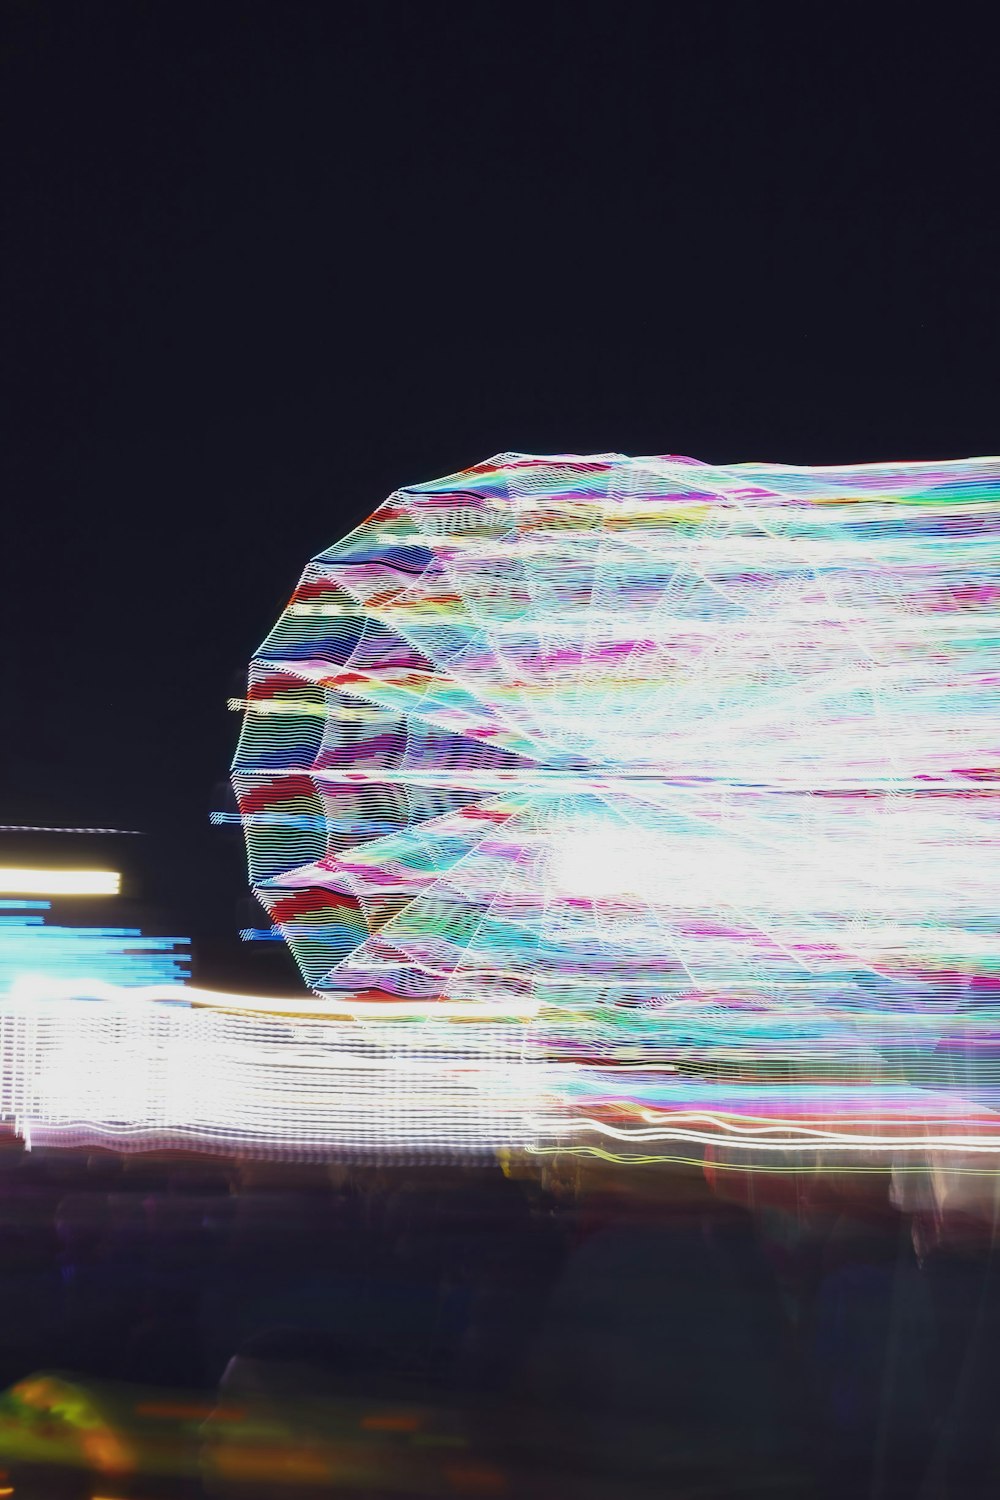 a blurry photo of a ferris wheel at night